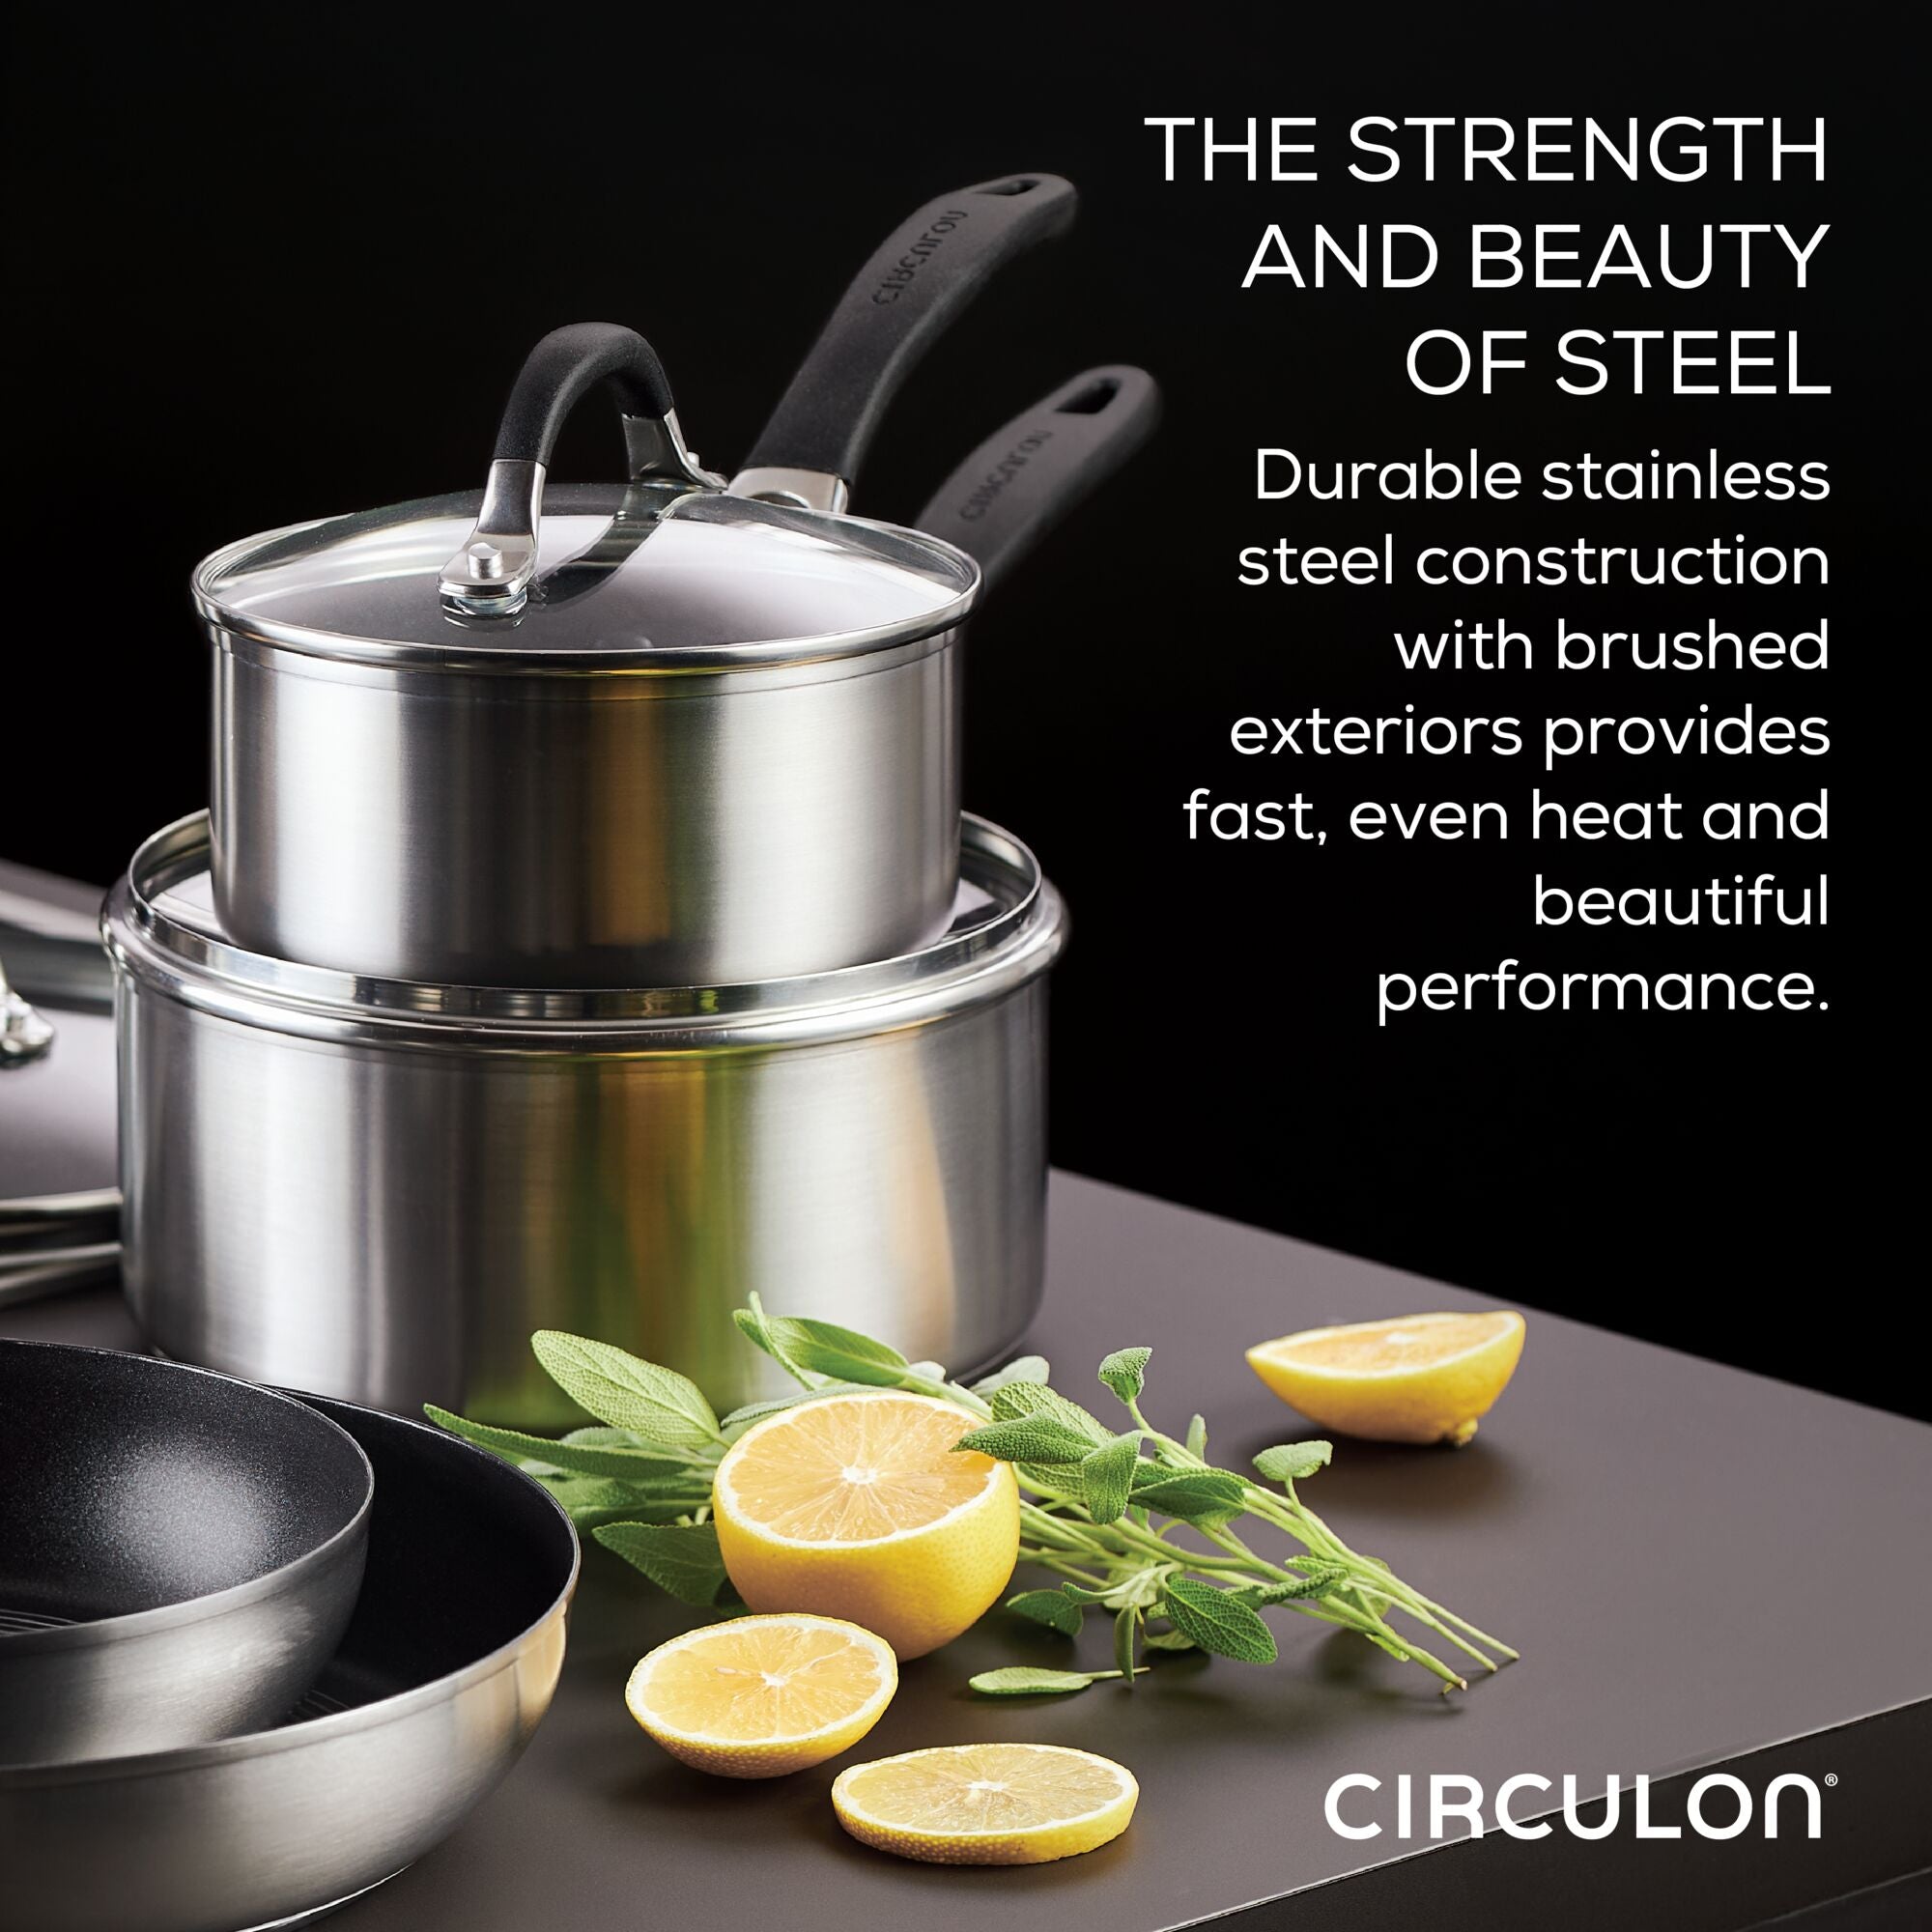  Circulon Clad Stainless Steel Cookware/Pots and Pans and  Utensil Set with Hybrid SteelShield and Nonstick Technology, 11 Piece -  Silver: Home & Kitchen